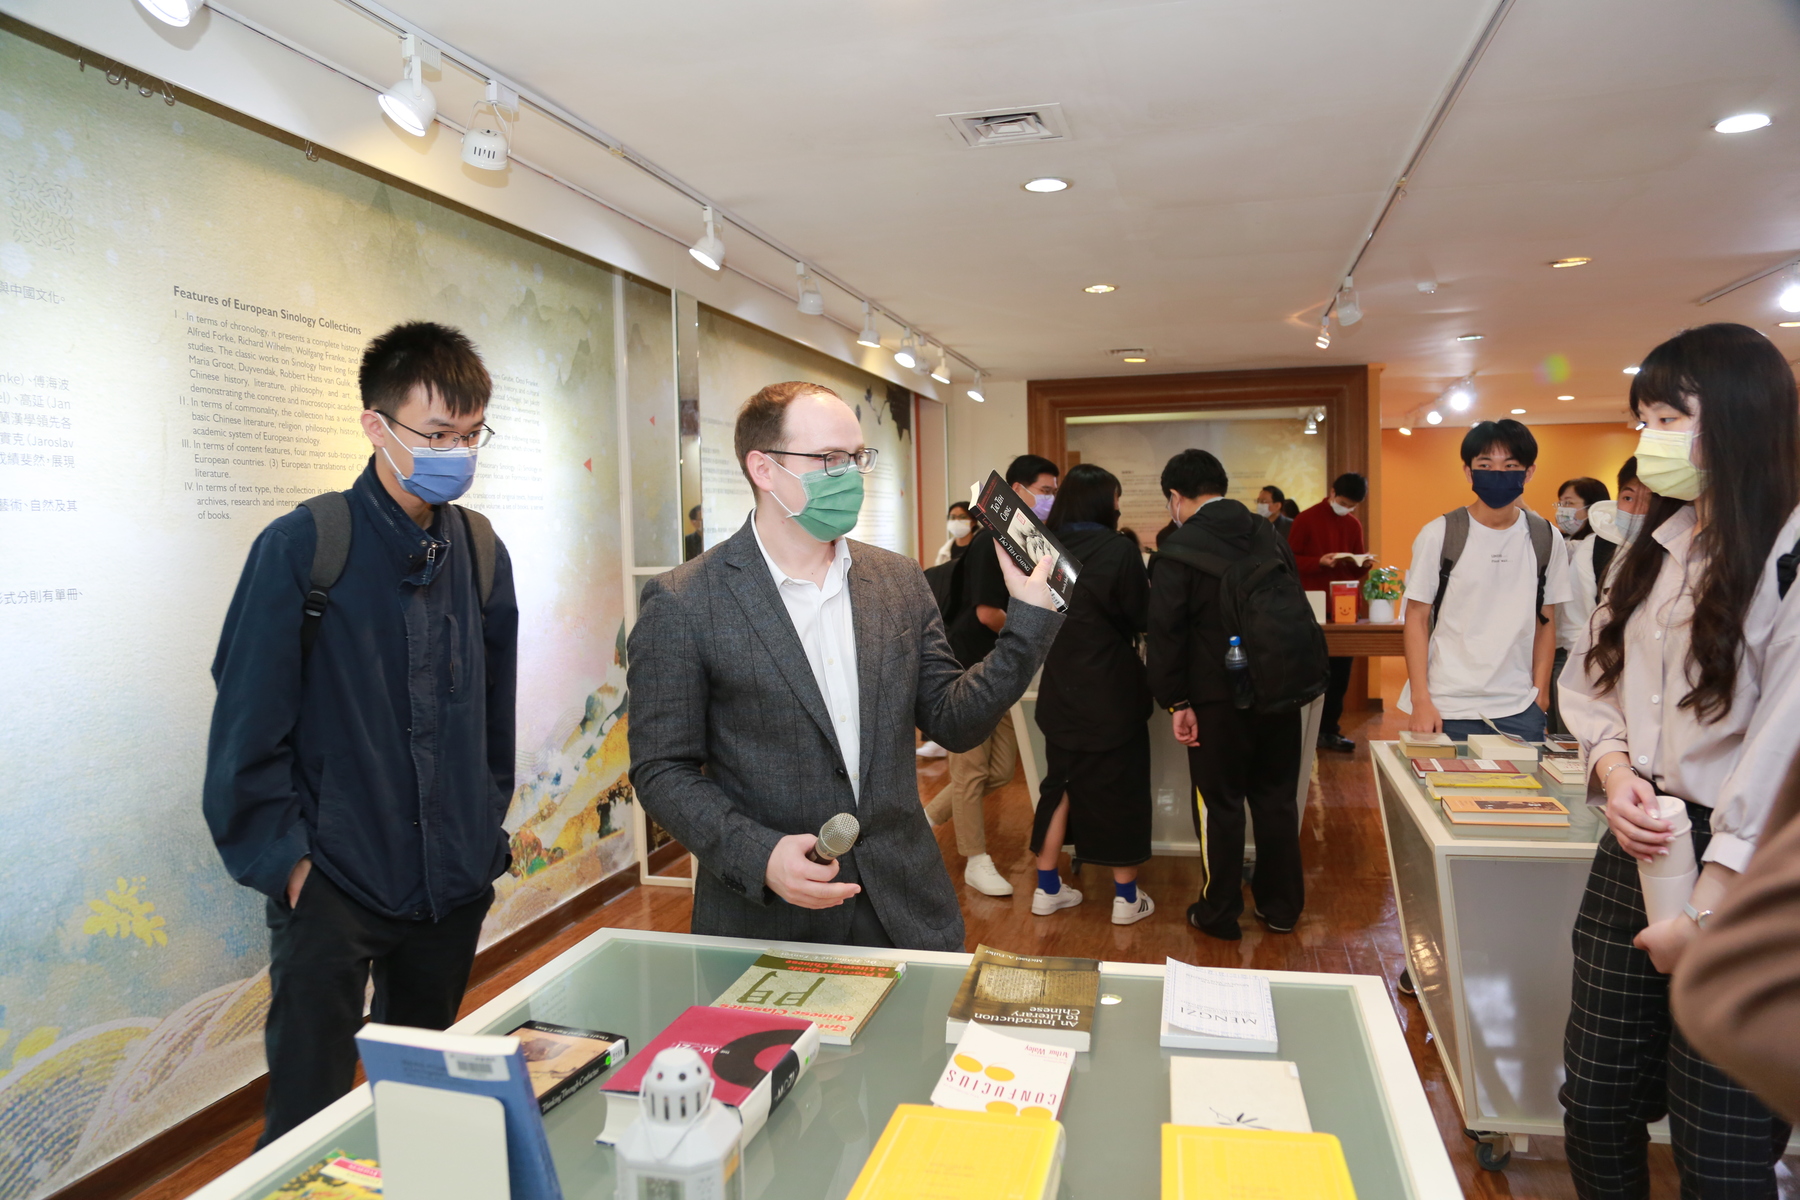 Book exhibition on Global Sinology available to visit by April 30